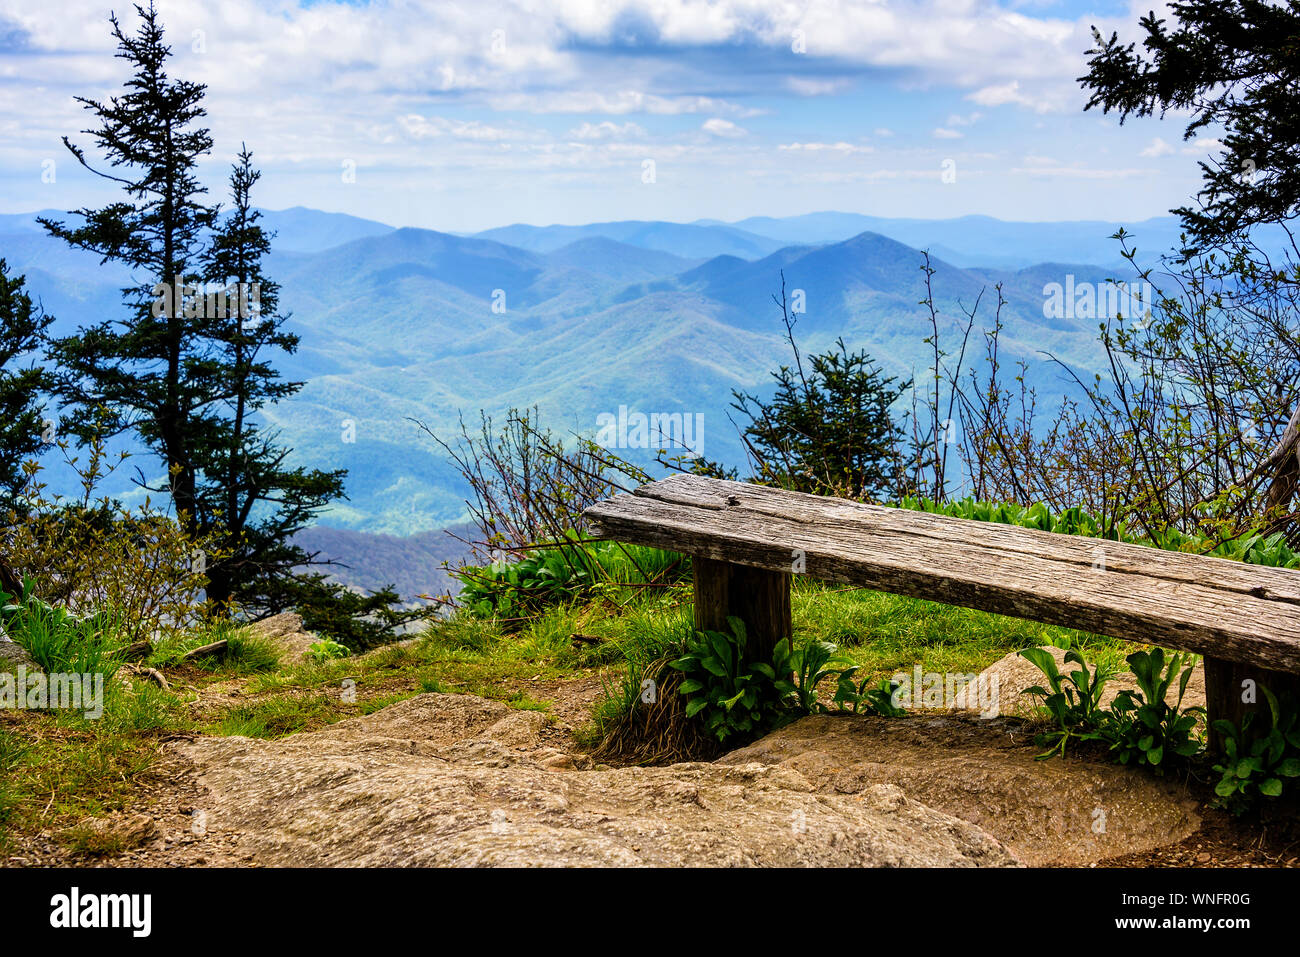 Scenic view from wooden bench of Smoky and Blue Ridge Mountains in North Carolina Stock Photo